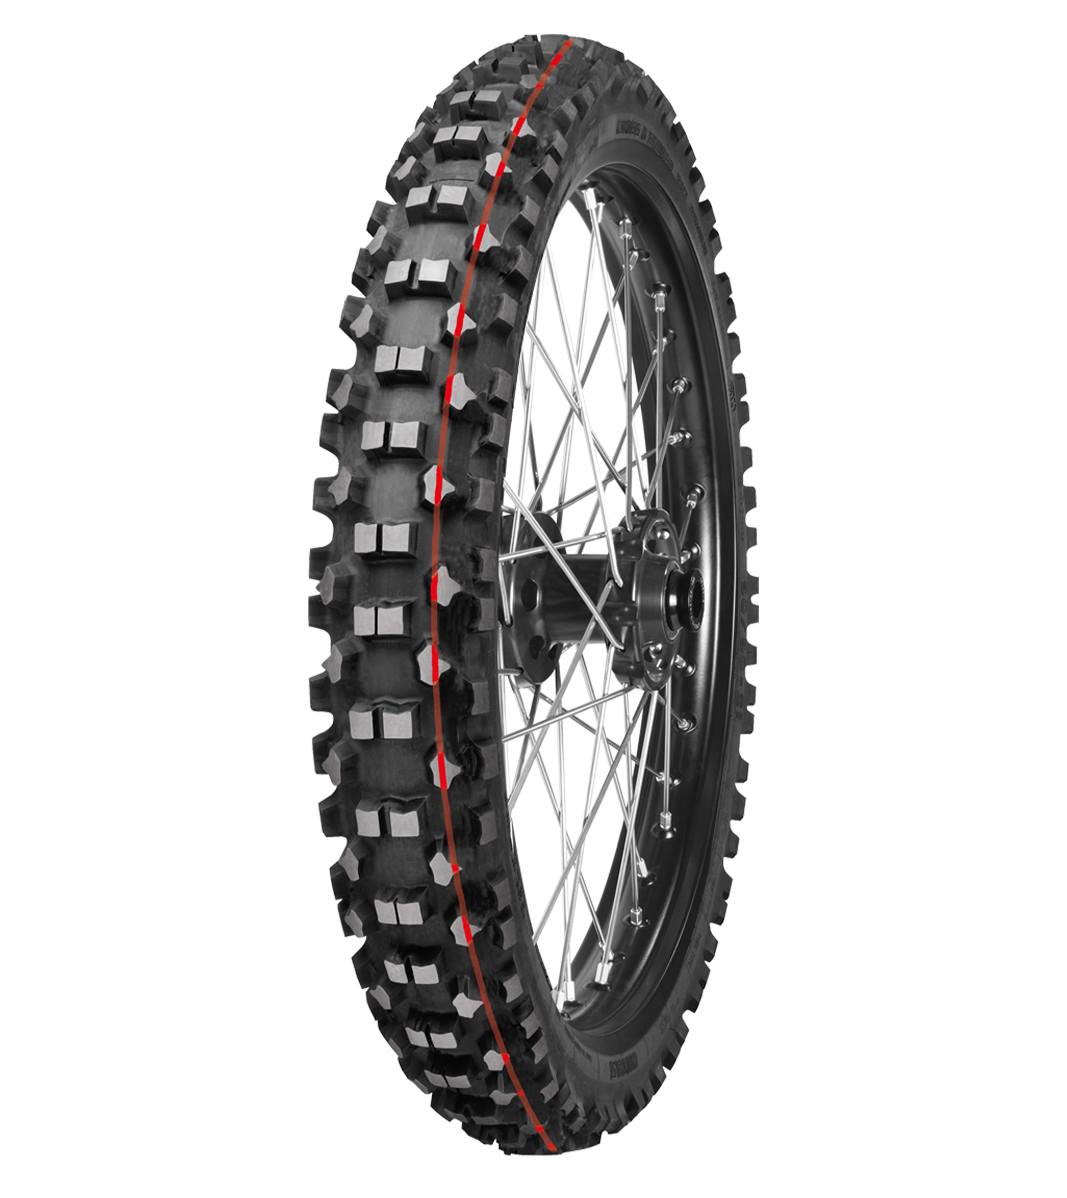 Mitas C-21 STONE KING 90/90-14 Pitcross Off-Road PIT CROSS 46M Red Tube Front Tire, 226071, 90/90-14, C-21 Stone King, Front, Off-Road, Pitcross, Tires - Imported and distributed in North &amp; South America by Lindeco Genuine Powersports - Premier Powersports Equipment and Accessories for Motorcycle Enthusiasts, Professional Riders and Dealers.